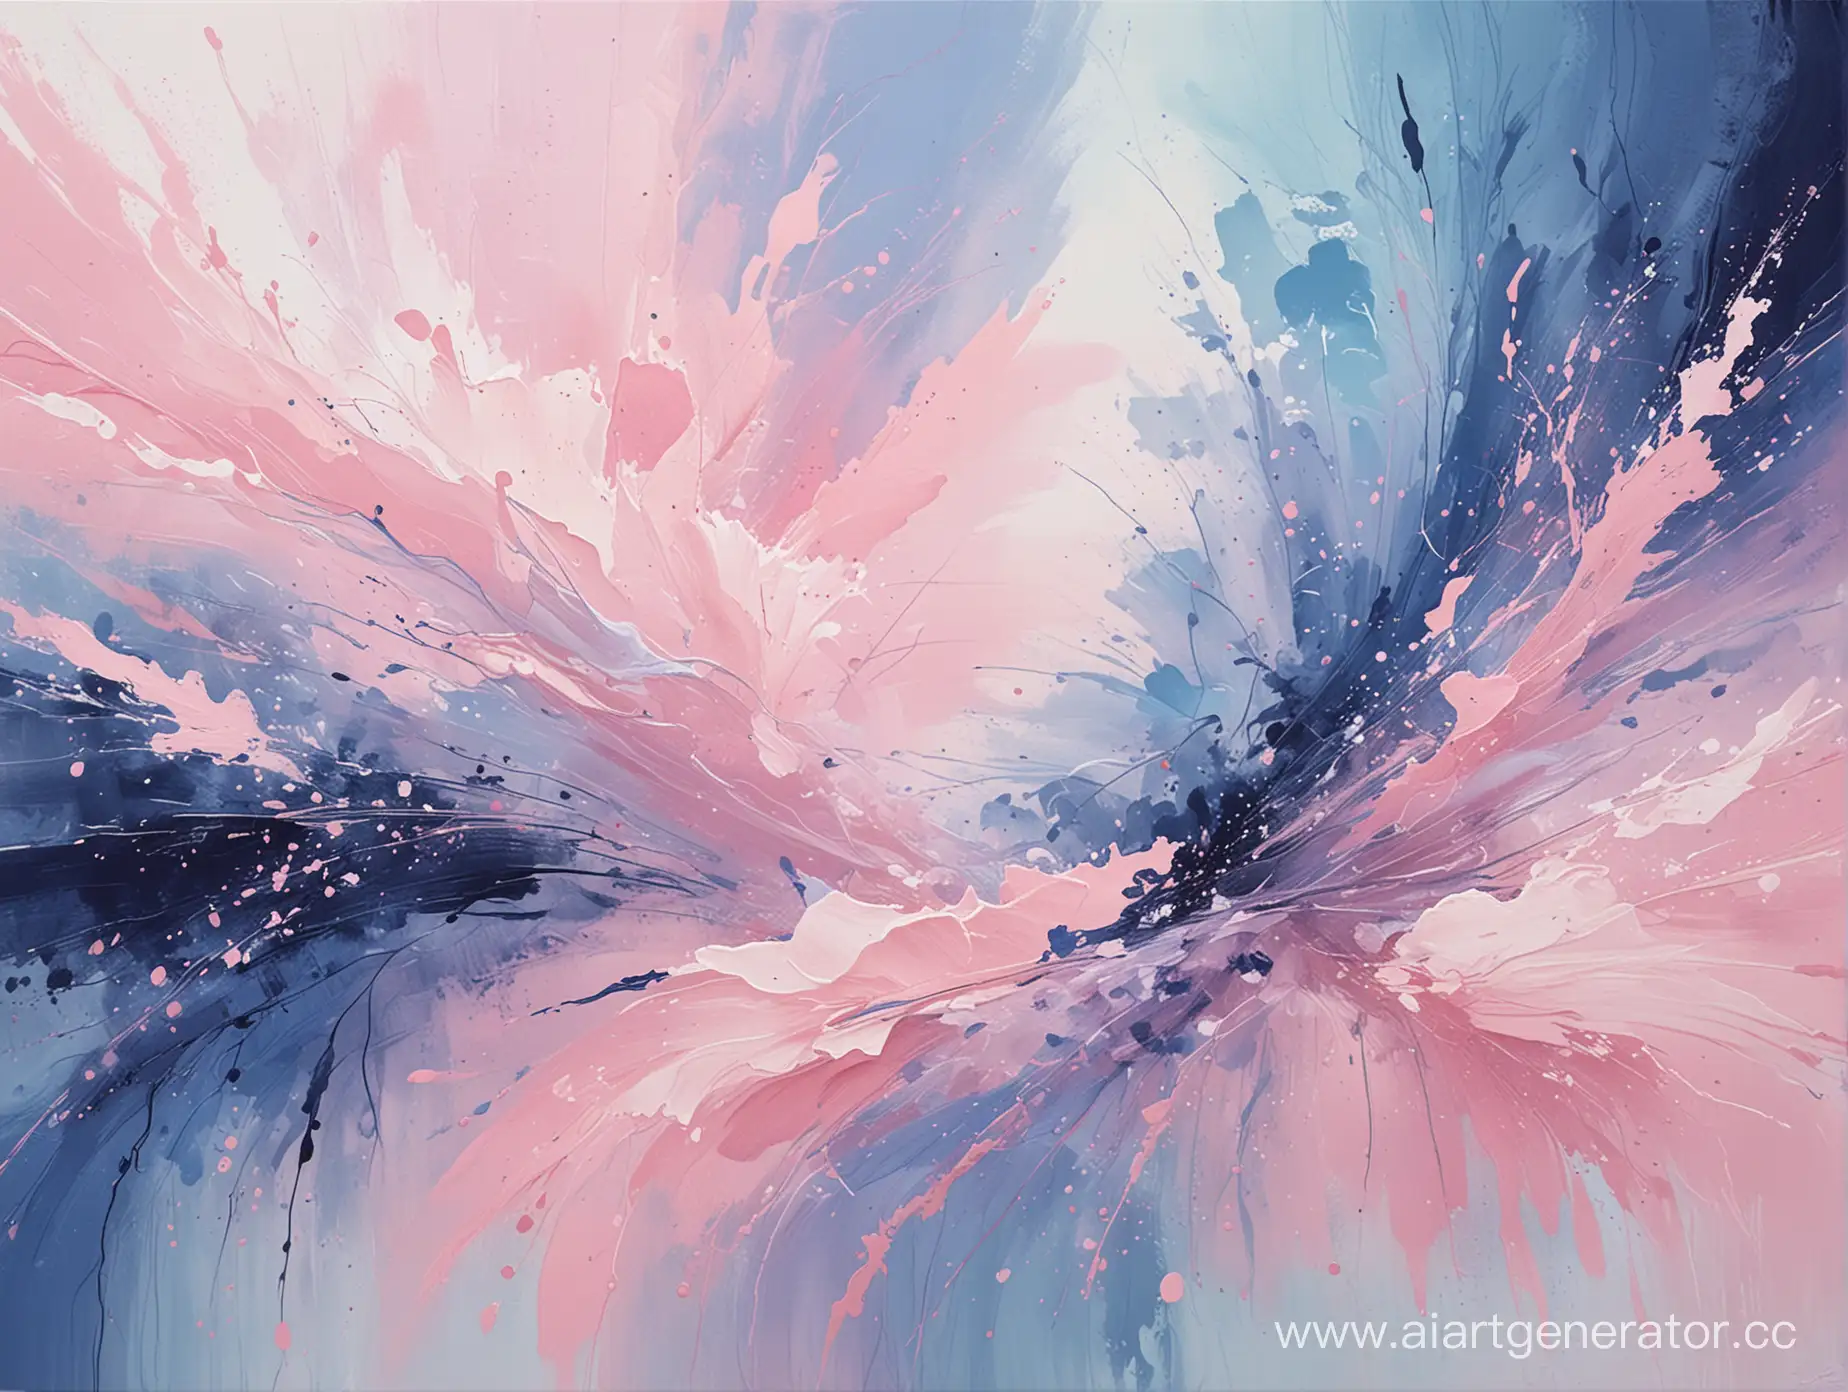 Delicate-Oil-Texture-Painting-with-Abstract-Patterns-in-Light-Pink-Blue-and-Indigo